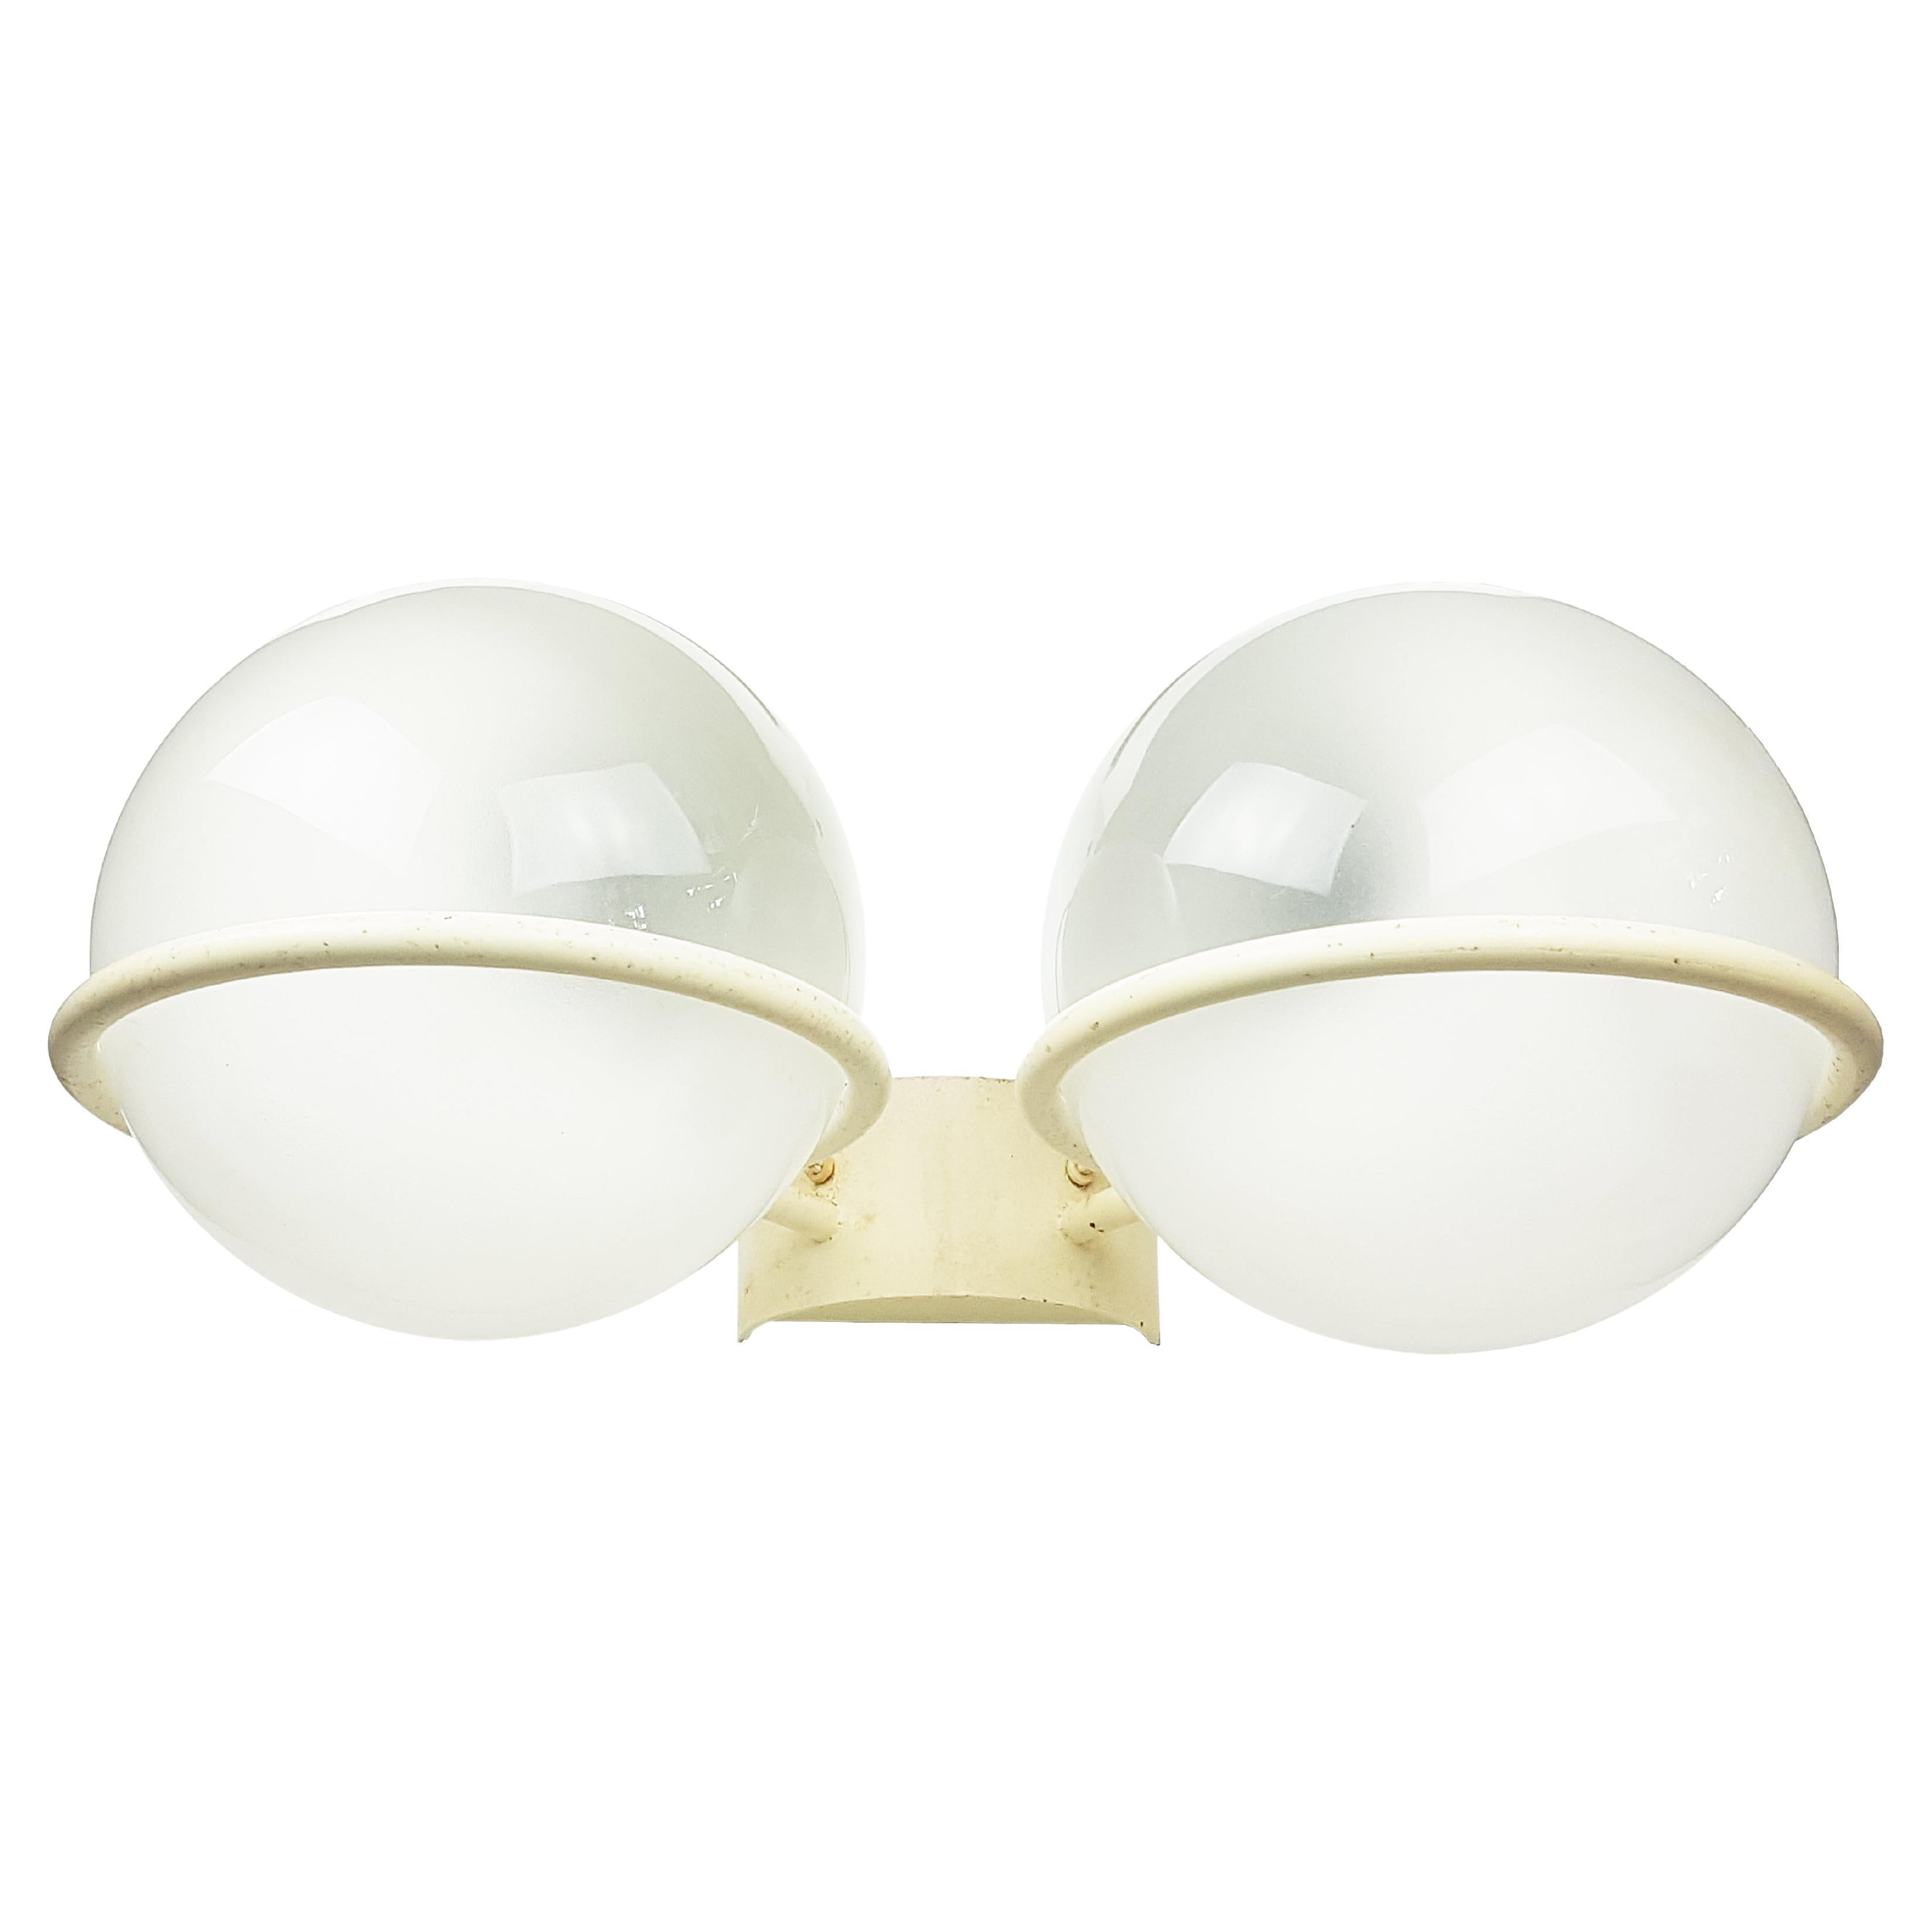 White Metal, Glass 1960 Mod. 238/2 Sconce by Gino Sarfatti for Arteluce For Sale